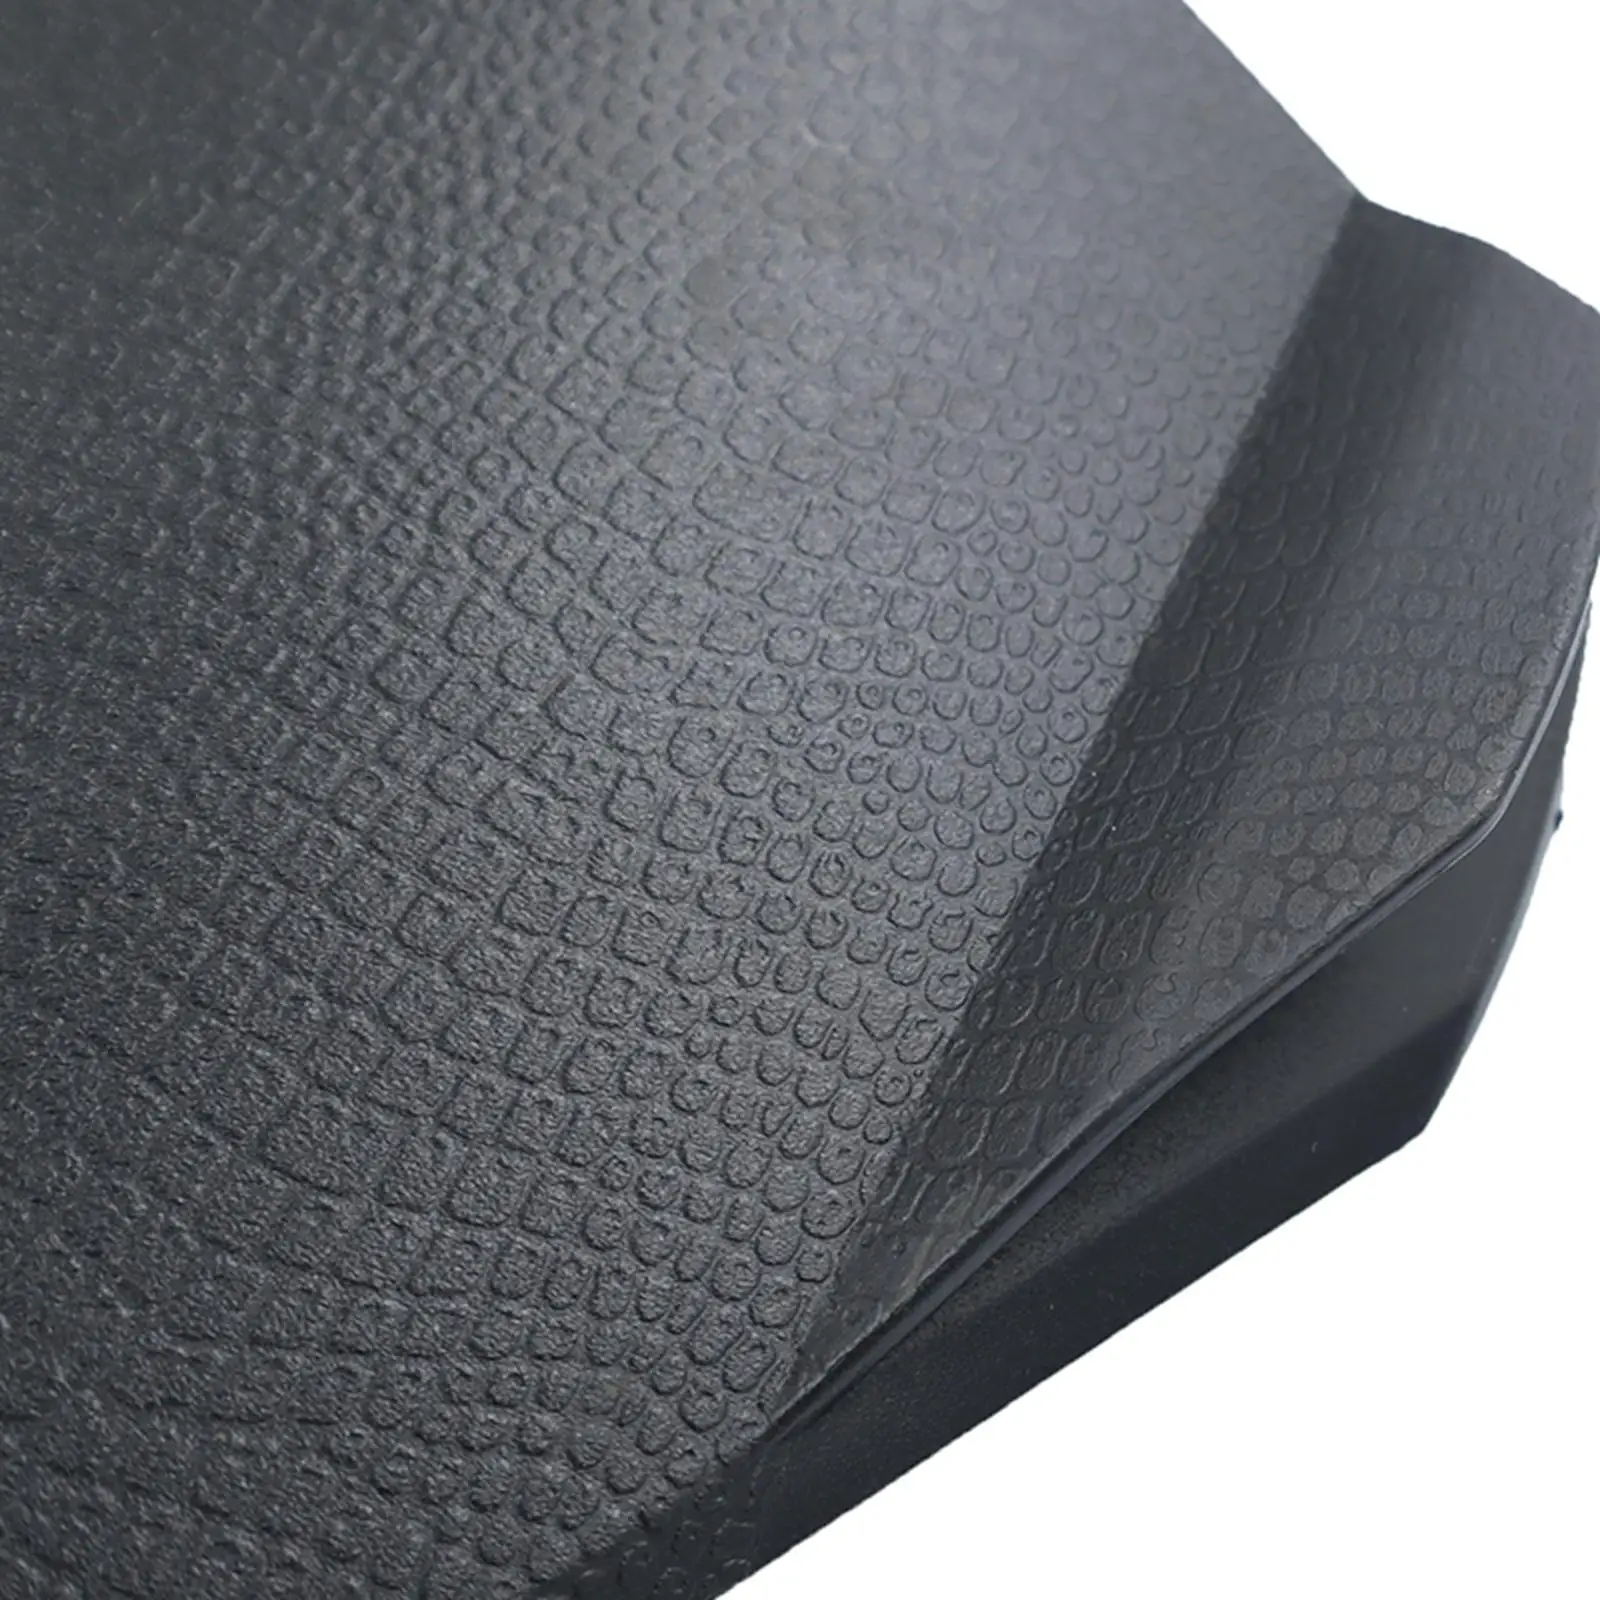 Hydrofoil Stabilizer  Sports Fin Reduces Drag Molded Parts  Hydro-Stabilizer for Outboard 15 -300 /